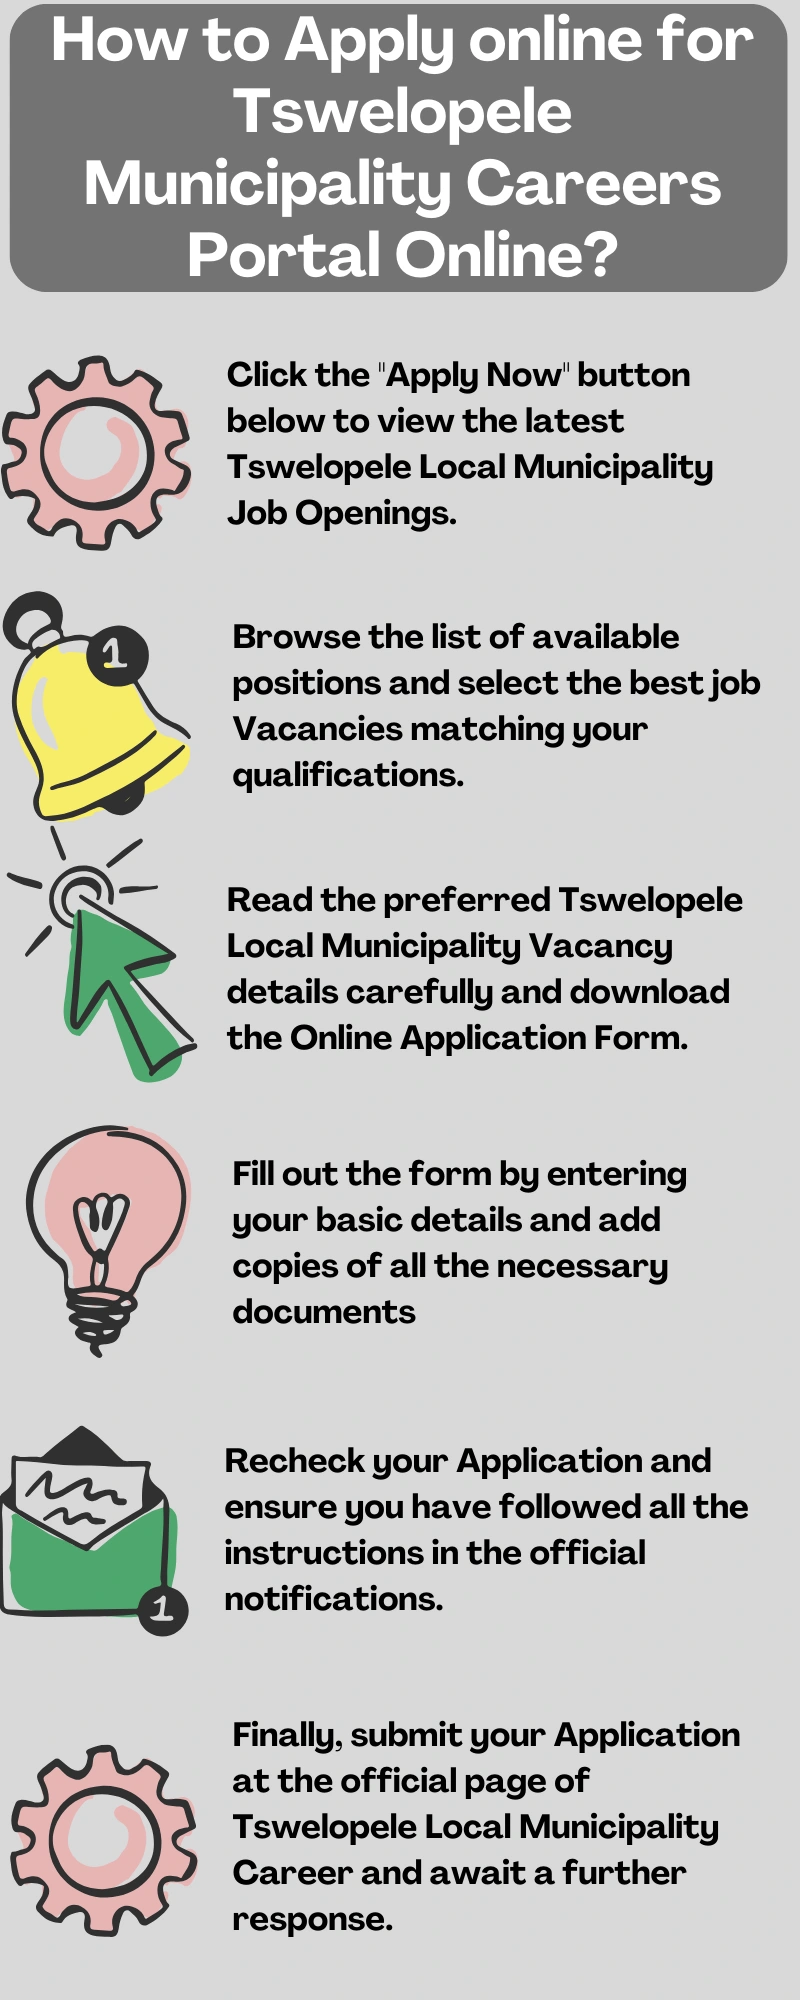 How to Apply online for Tswelopele Municipality Careers Portal Online?